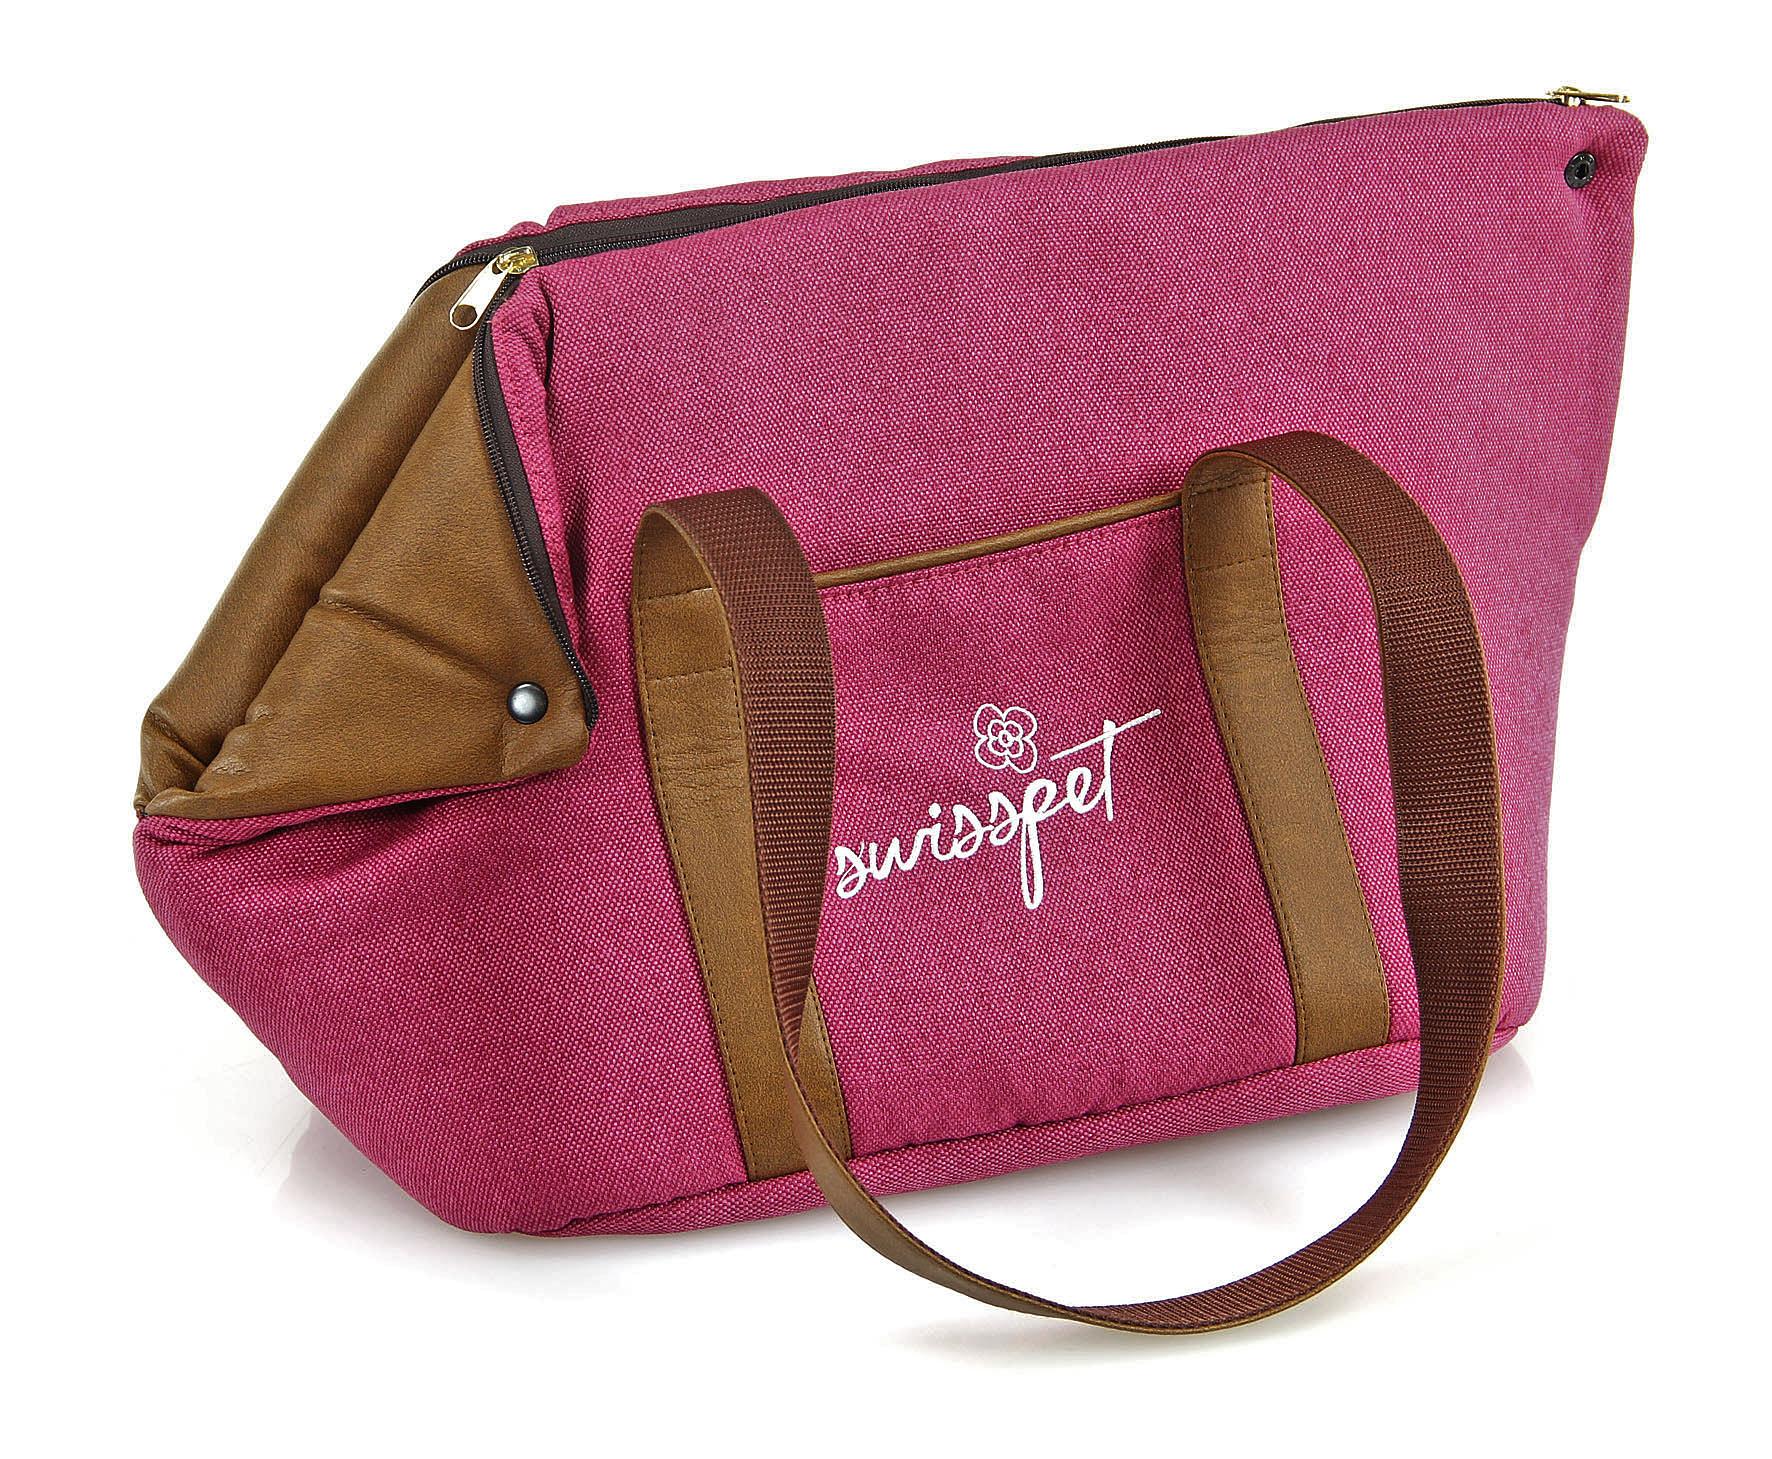 swisspet Tragtasche Ting-Ting